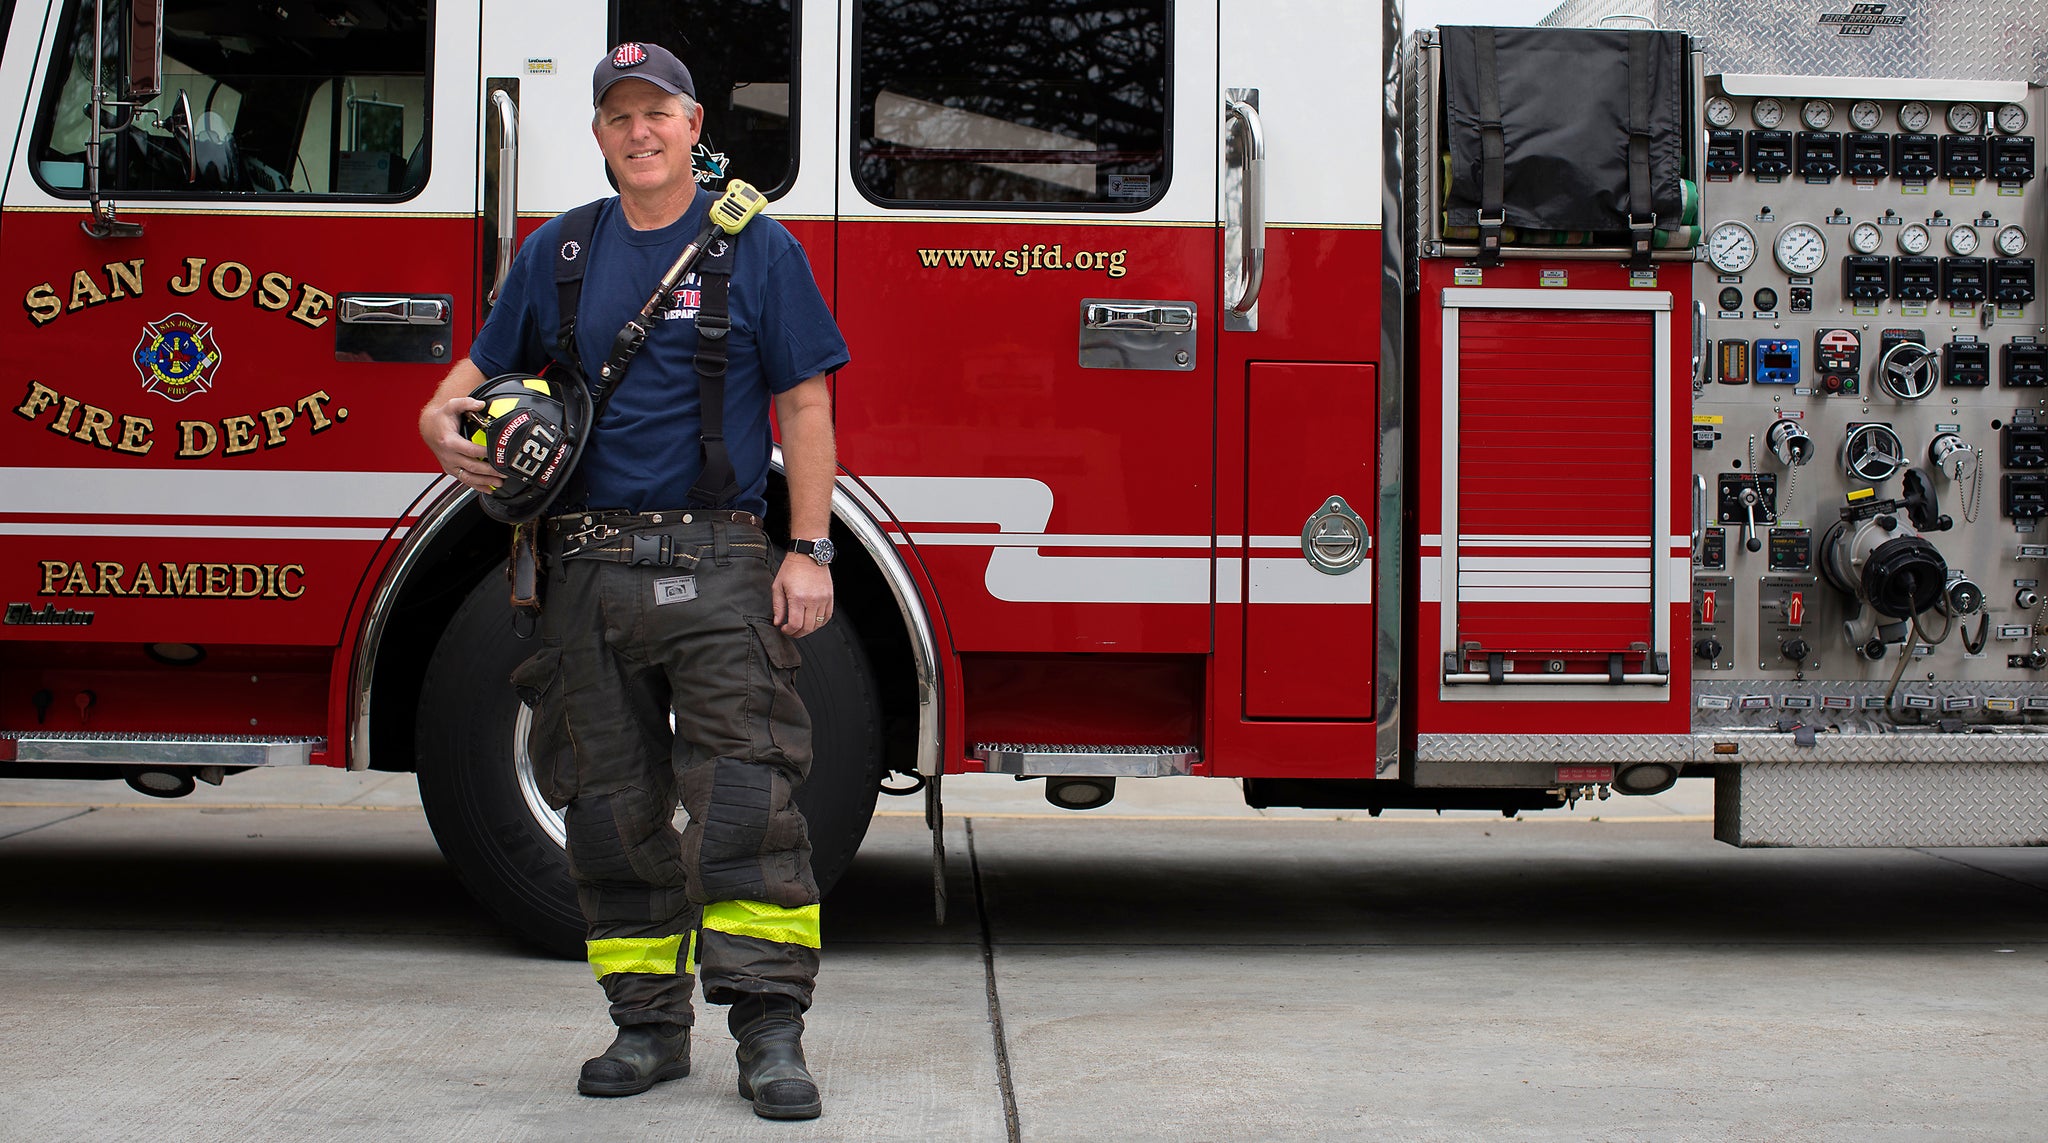 Dave Scocca: Firefighter, First Responder and Friend